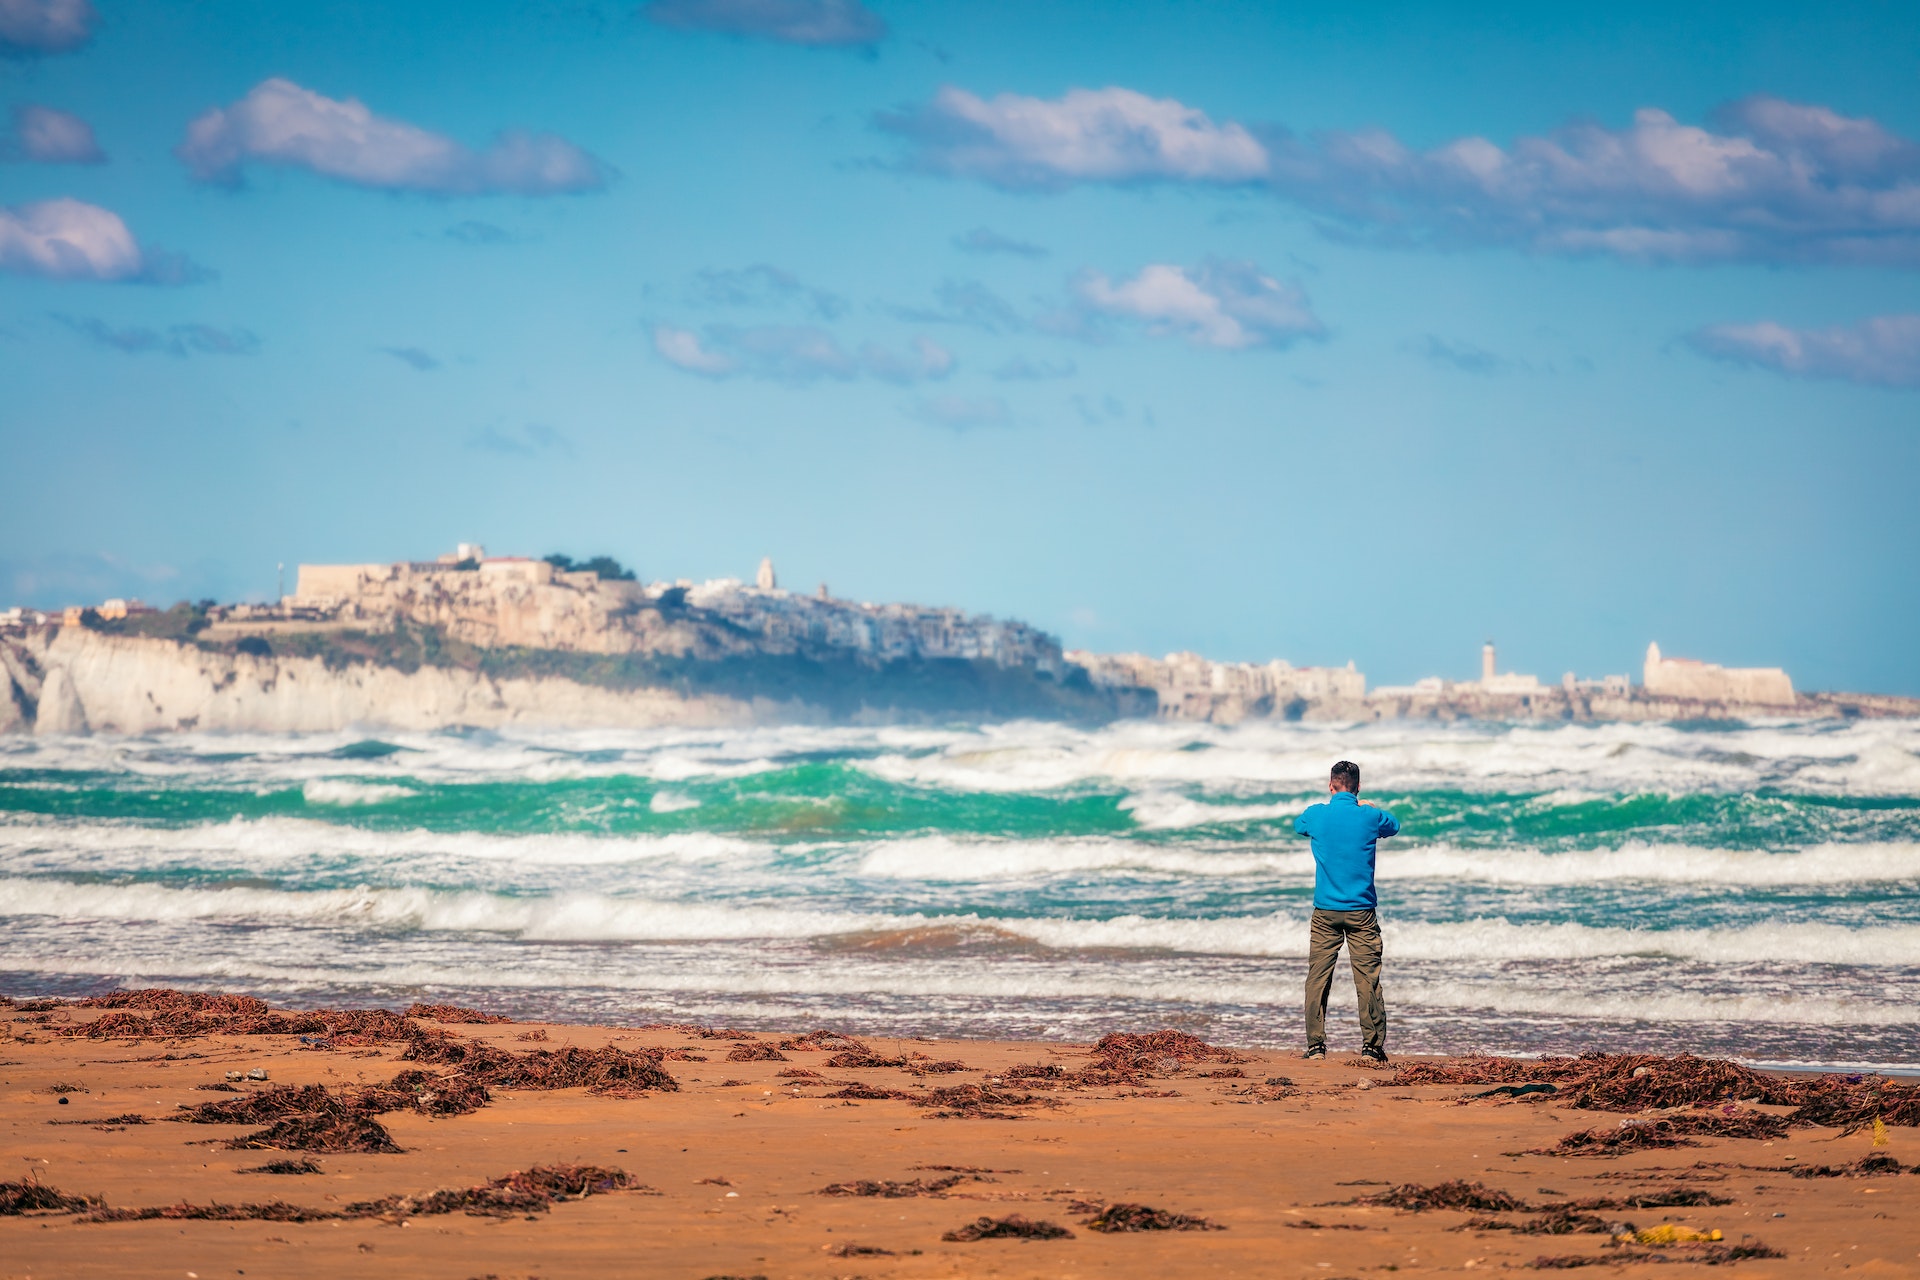 A man stands on a beach with waves crashing at sea and takes a photo of a clifftop town in the distance